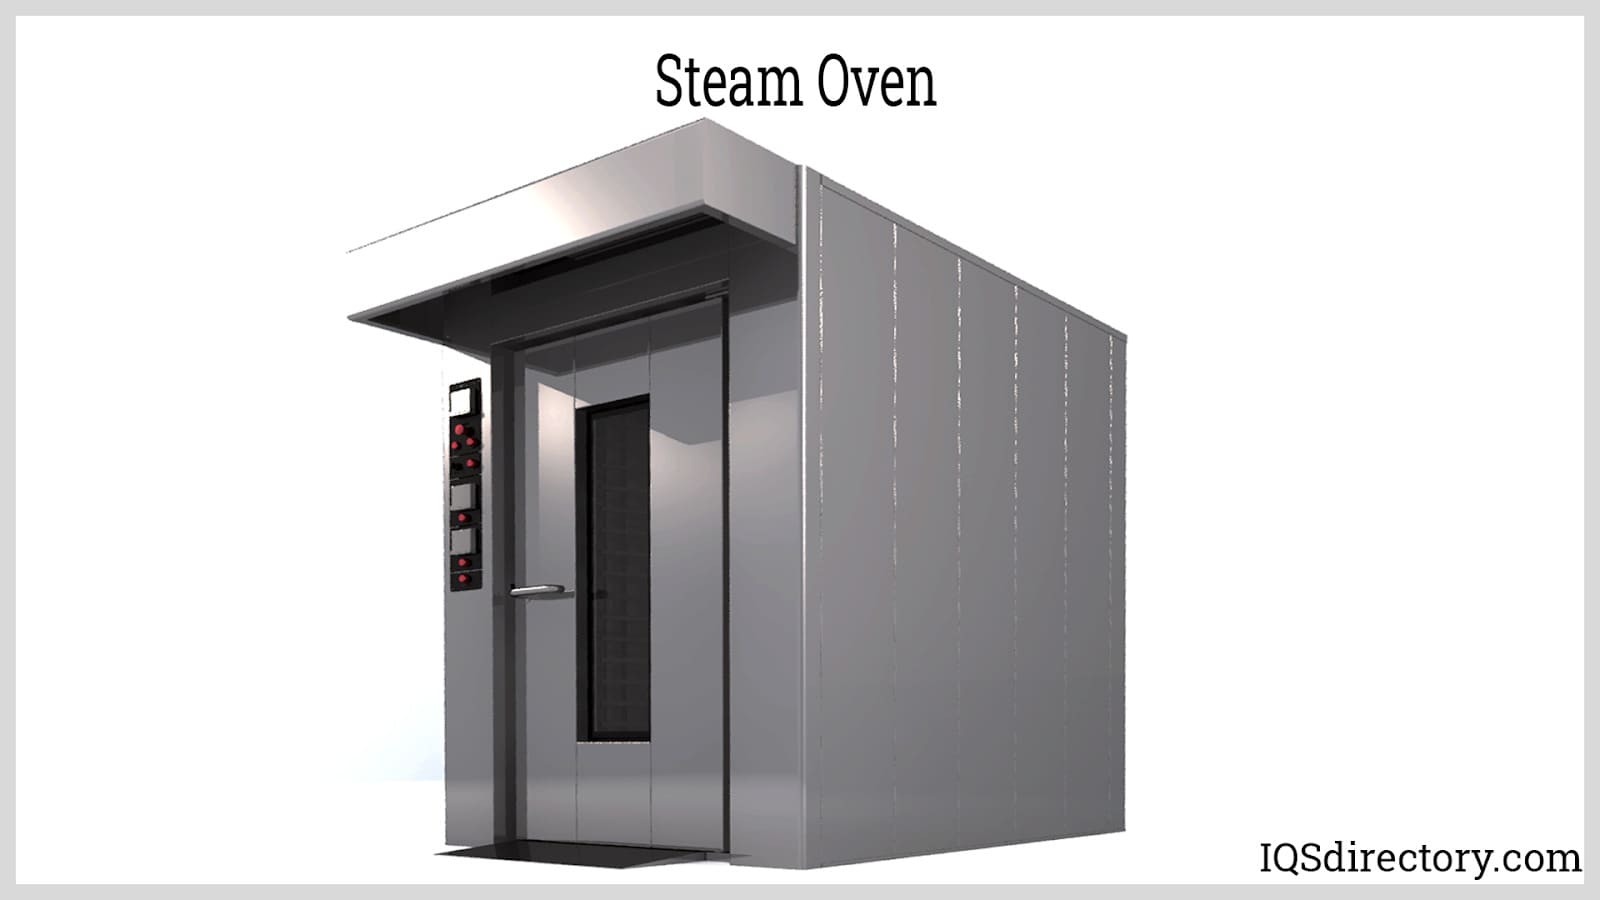 https://www.iqsdirectory.com/articles/industrial-oven/curing-ovens/steam-oven.jpg